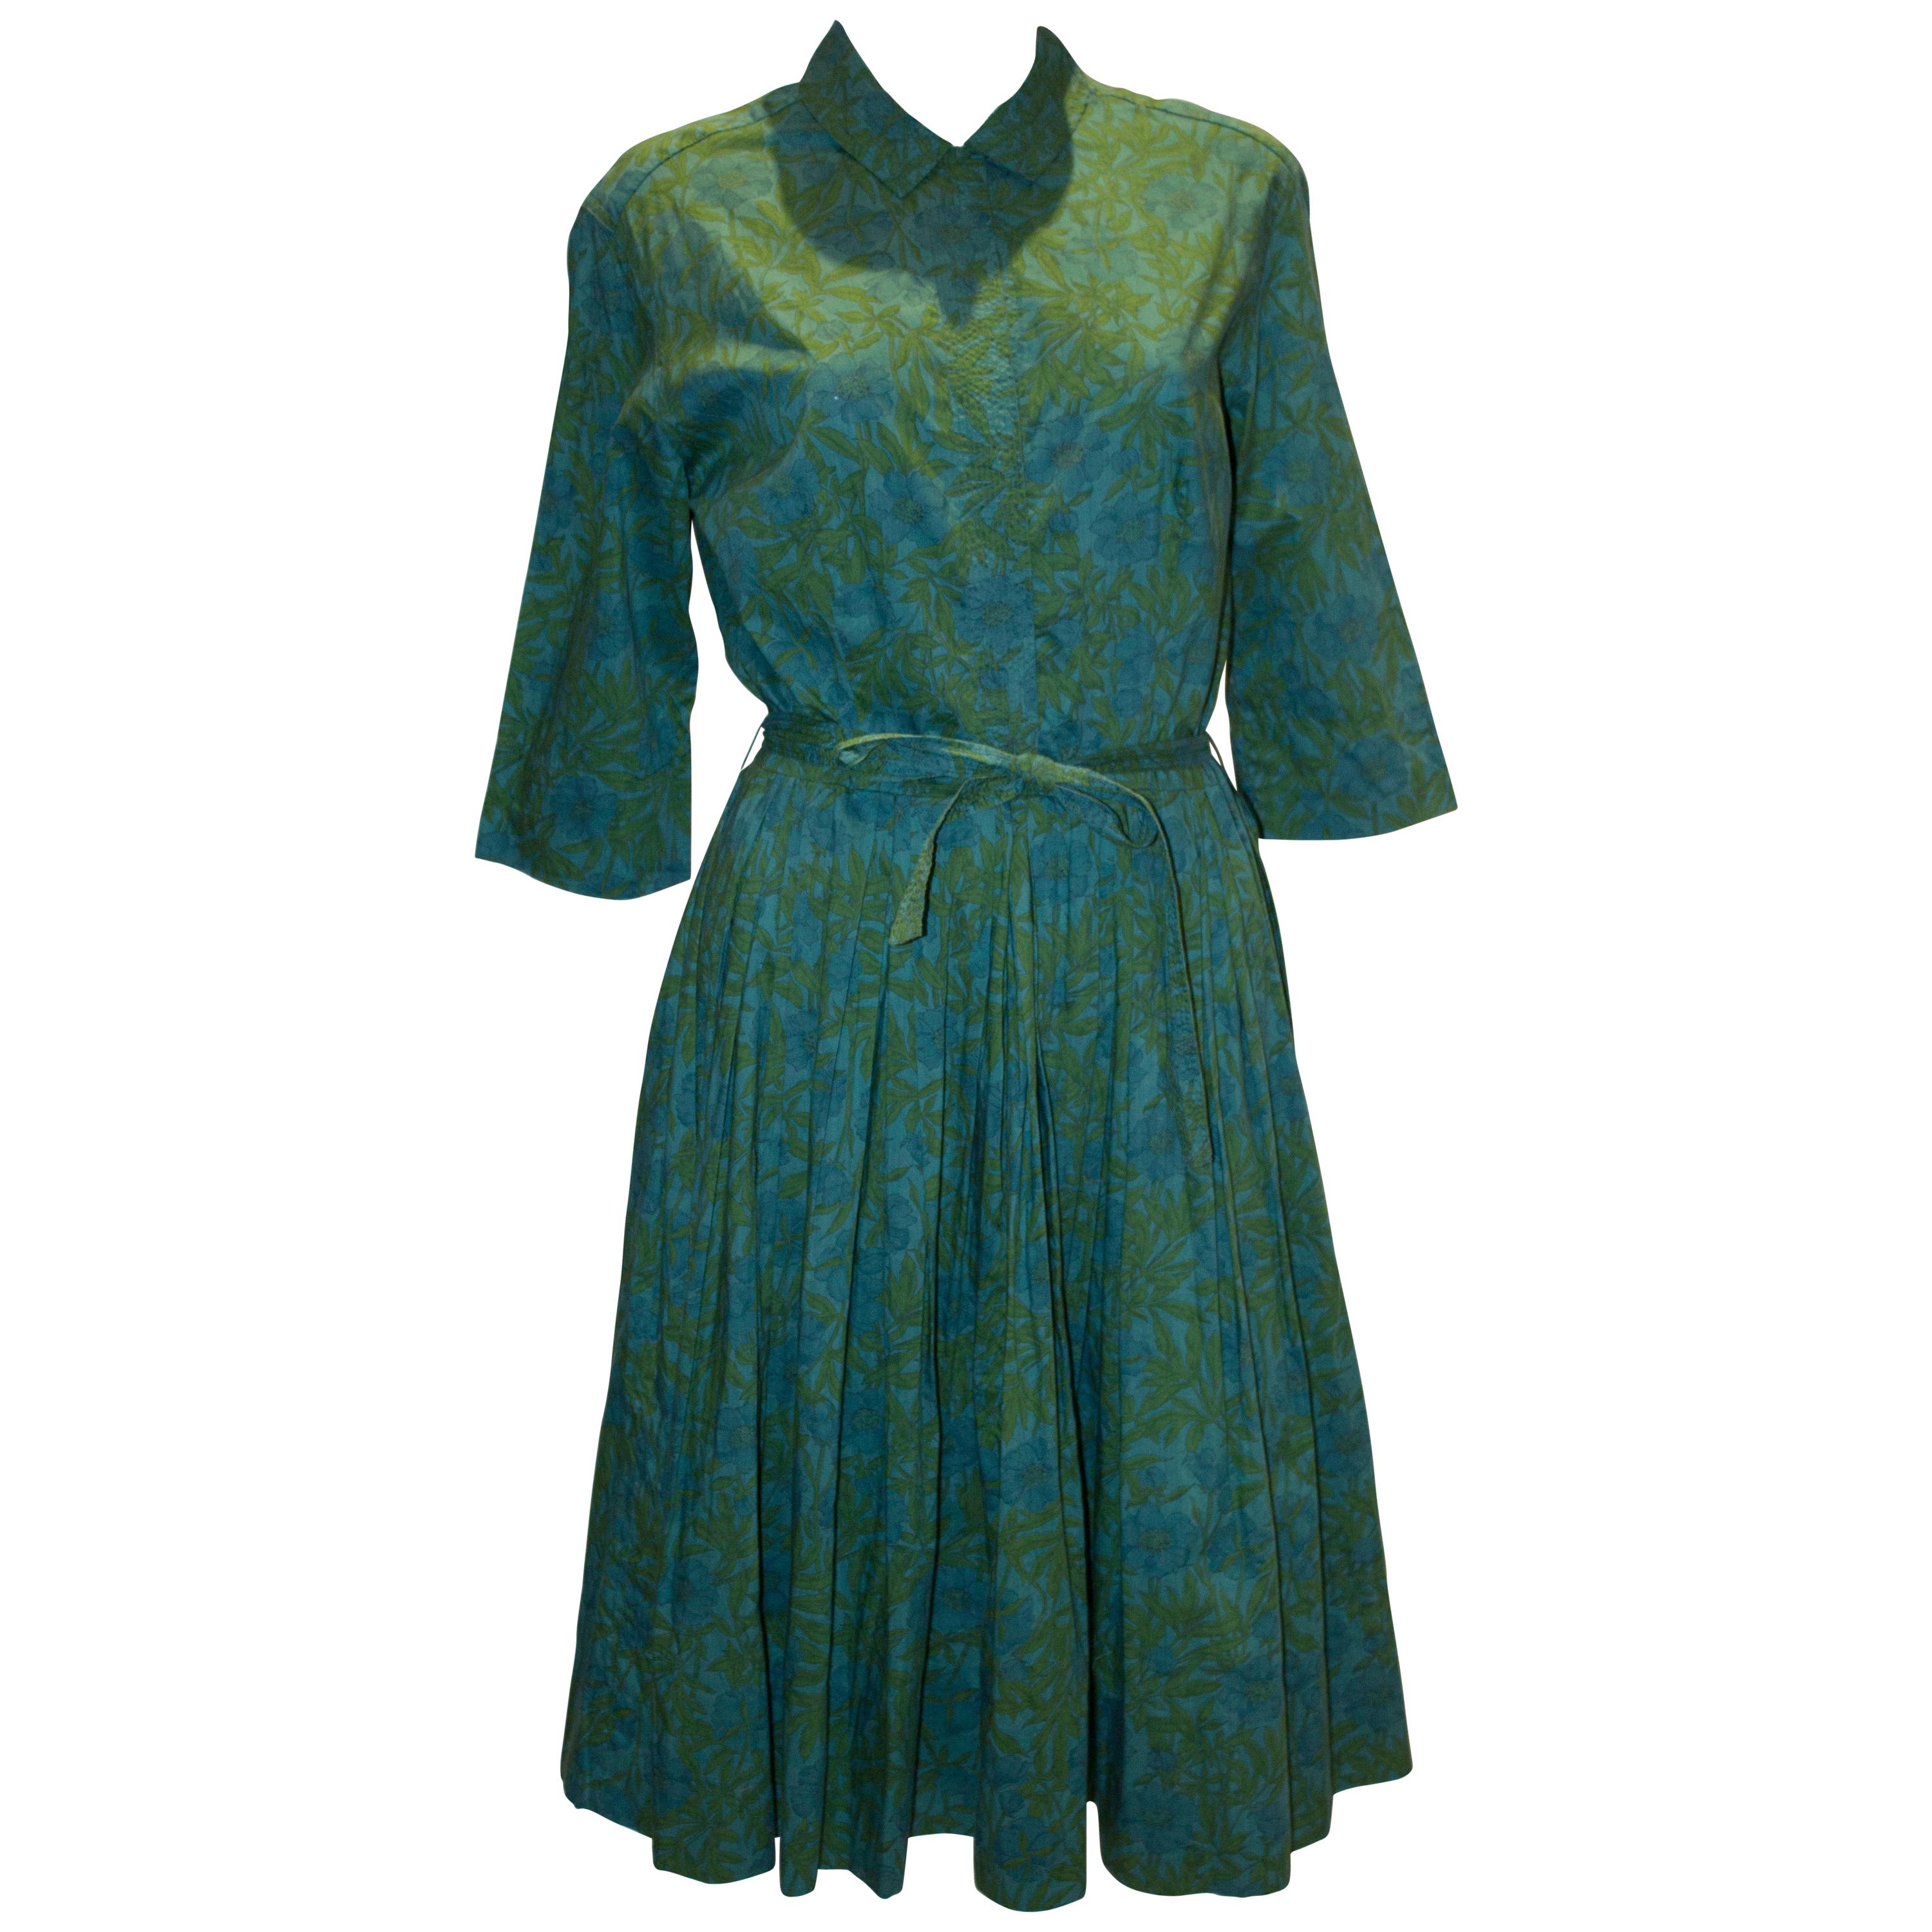 Vintage Dress by Best and Co, 5th Avenue For Sale